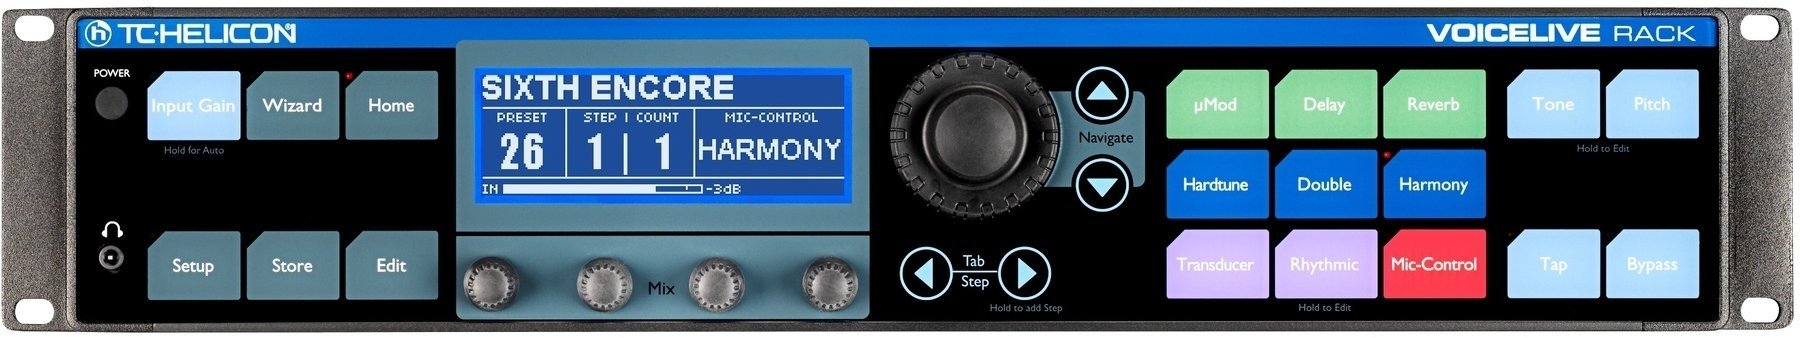 Vocal Effects Processor TC Helicon VoiceLive Rack